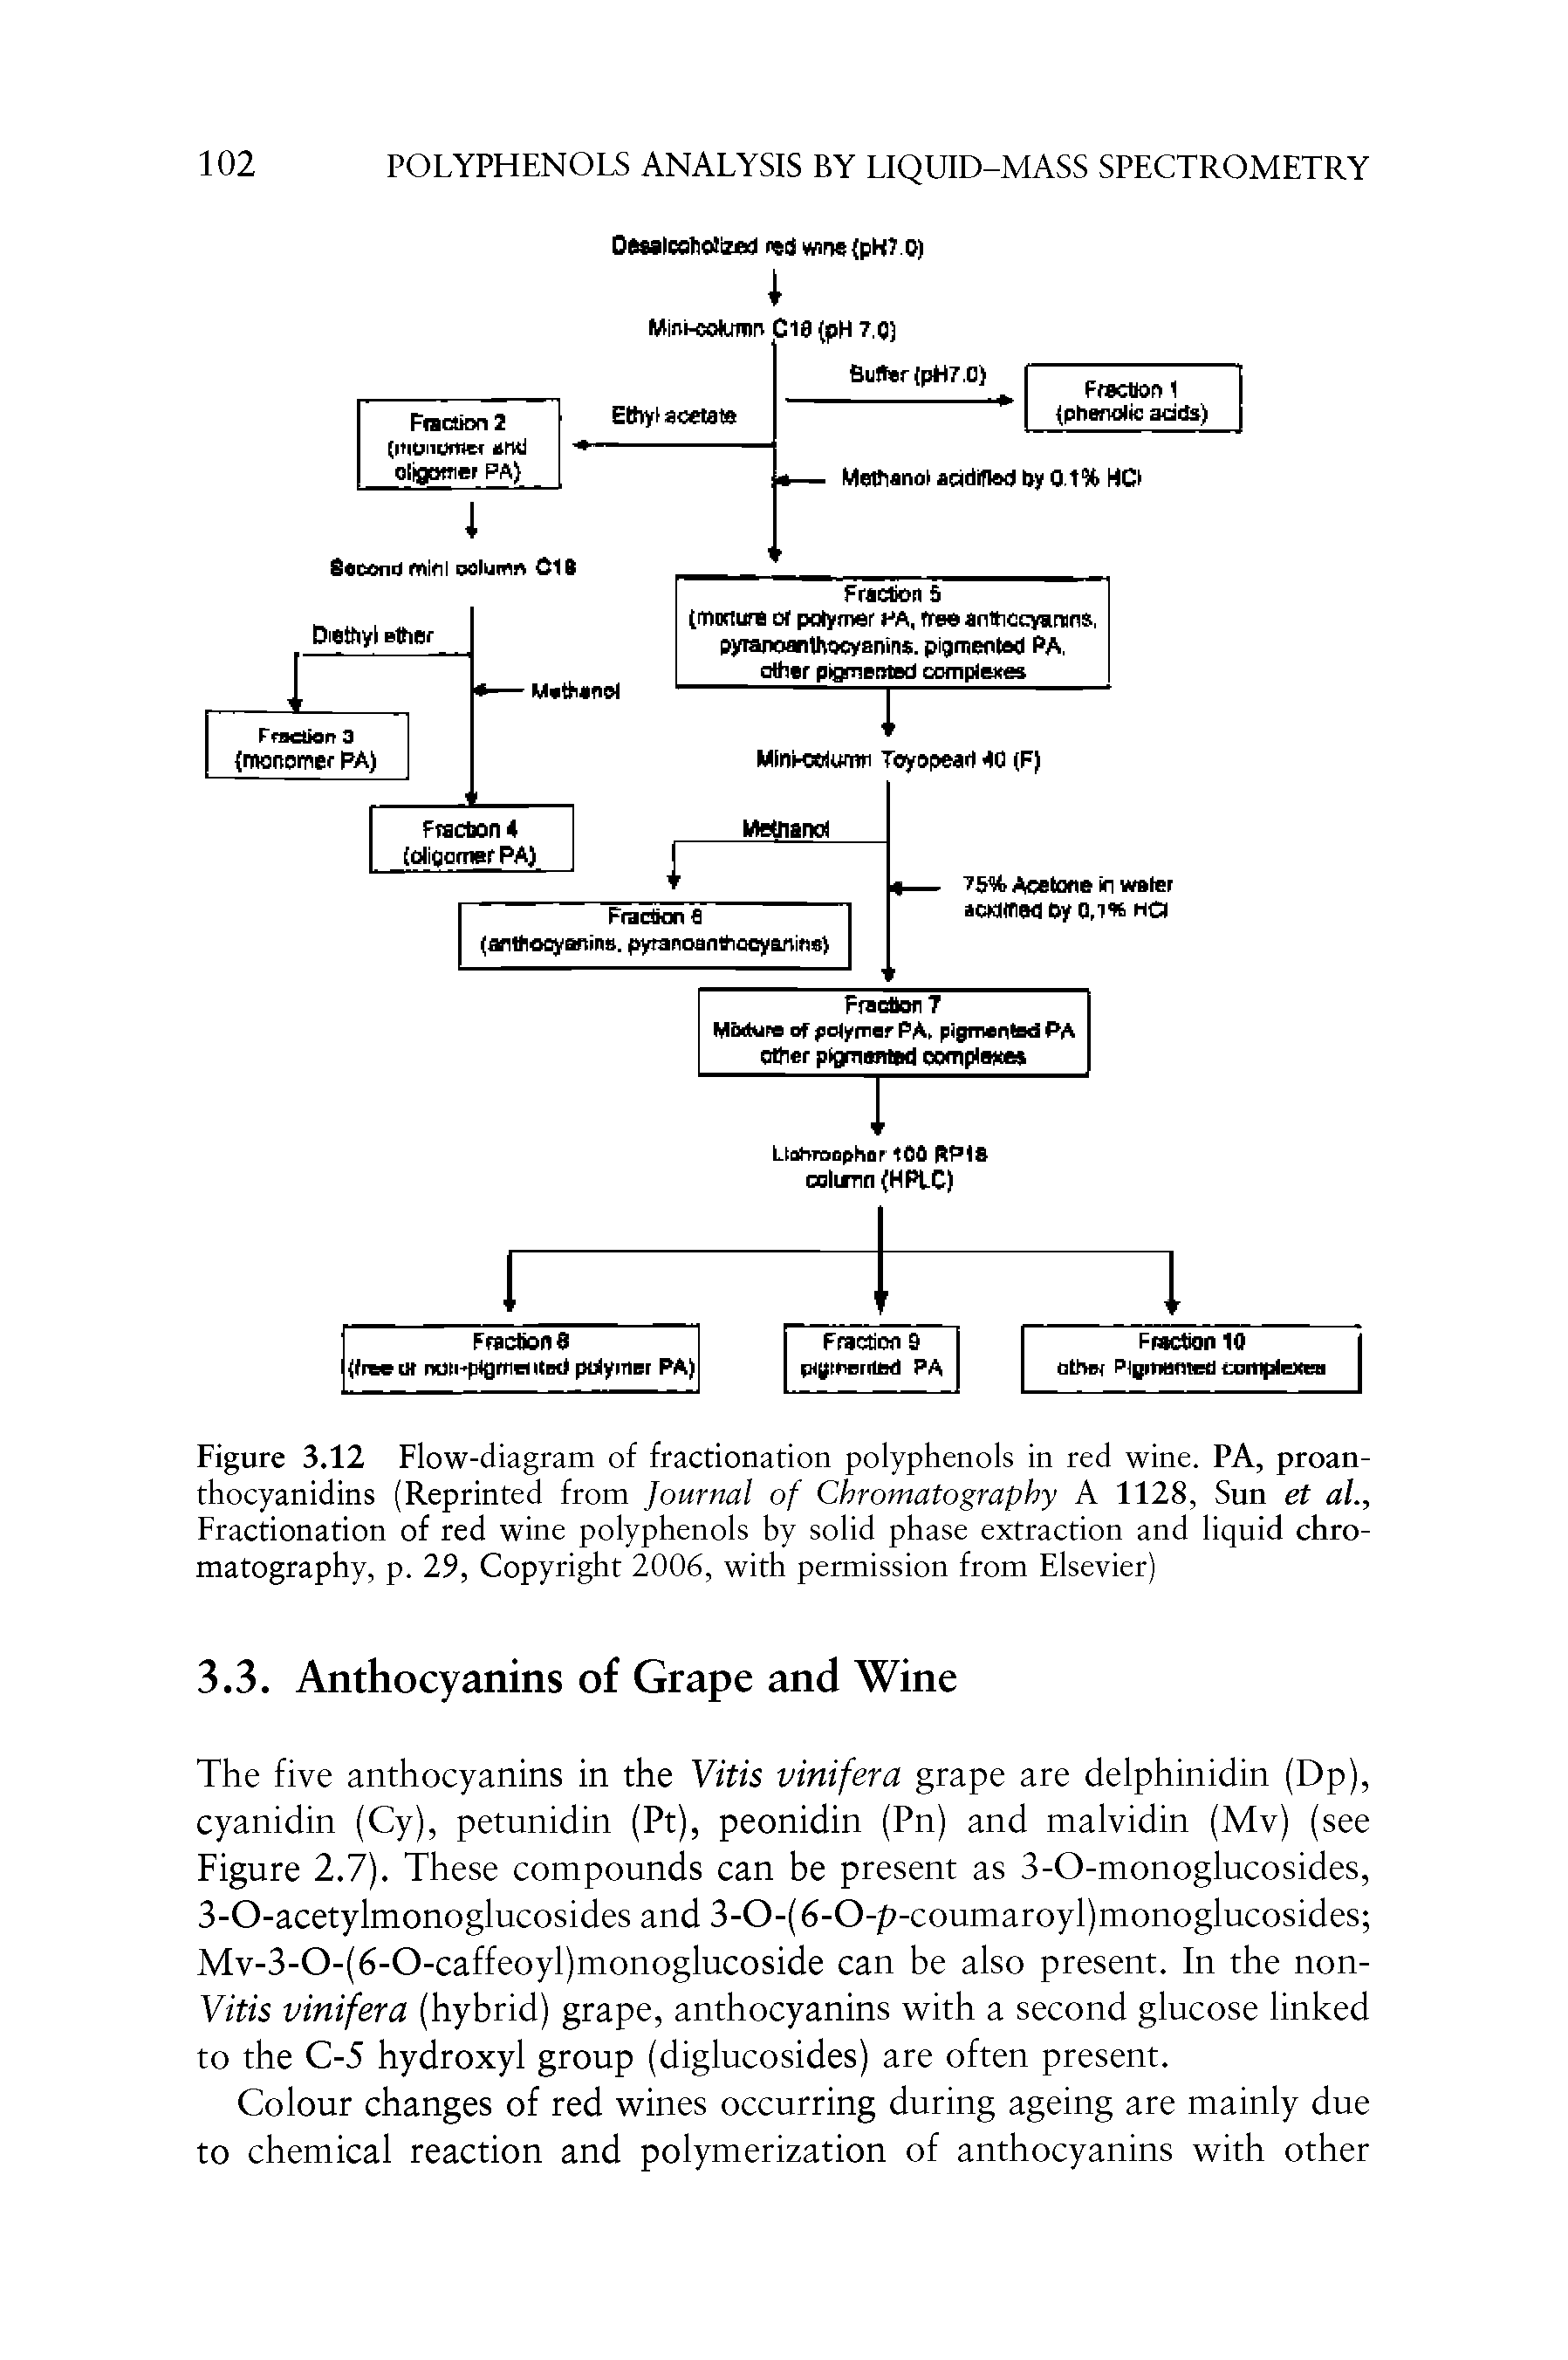 Figure 3.12 Flow-diagram of fractionation polyphenols in red wine. PA, proan-thocyanidins (Reprinted from Journal of Chromatography A 1128, Sun et al., Fractionation of red wine polyphenols by solid phase extraction and liquid chromatography, p. 29, Copyright 2006, with permission from Elsevier)...